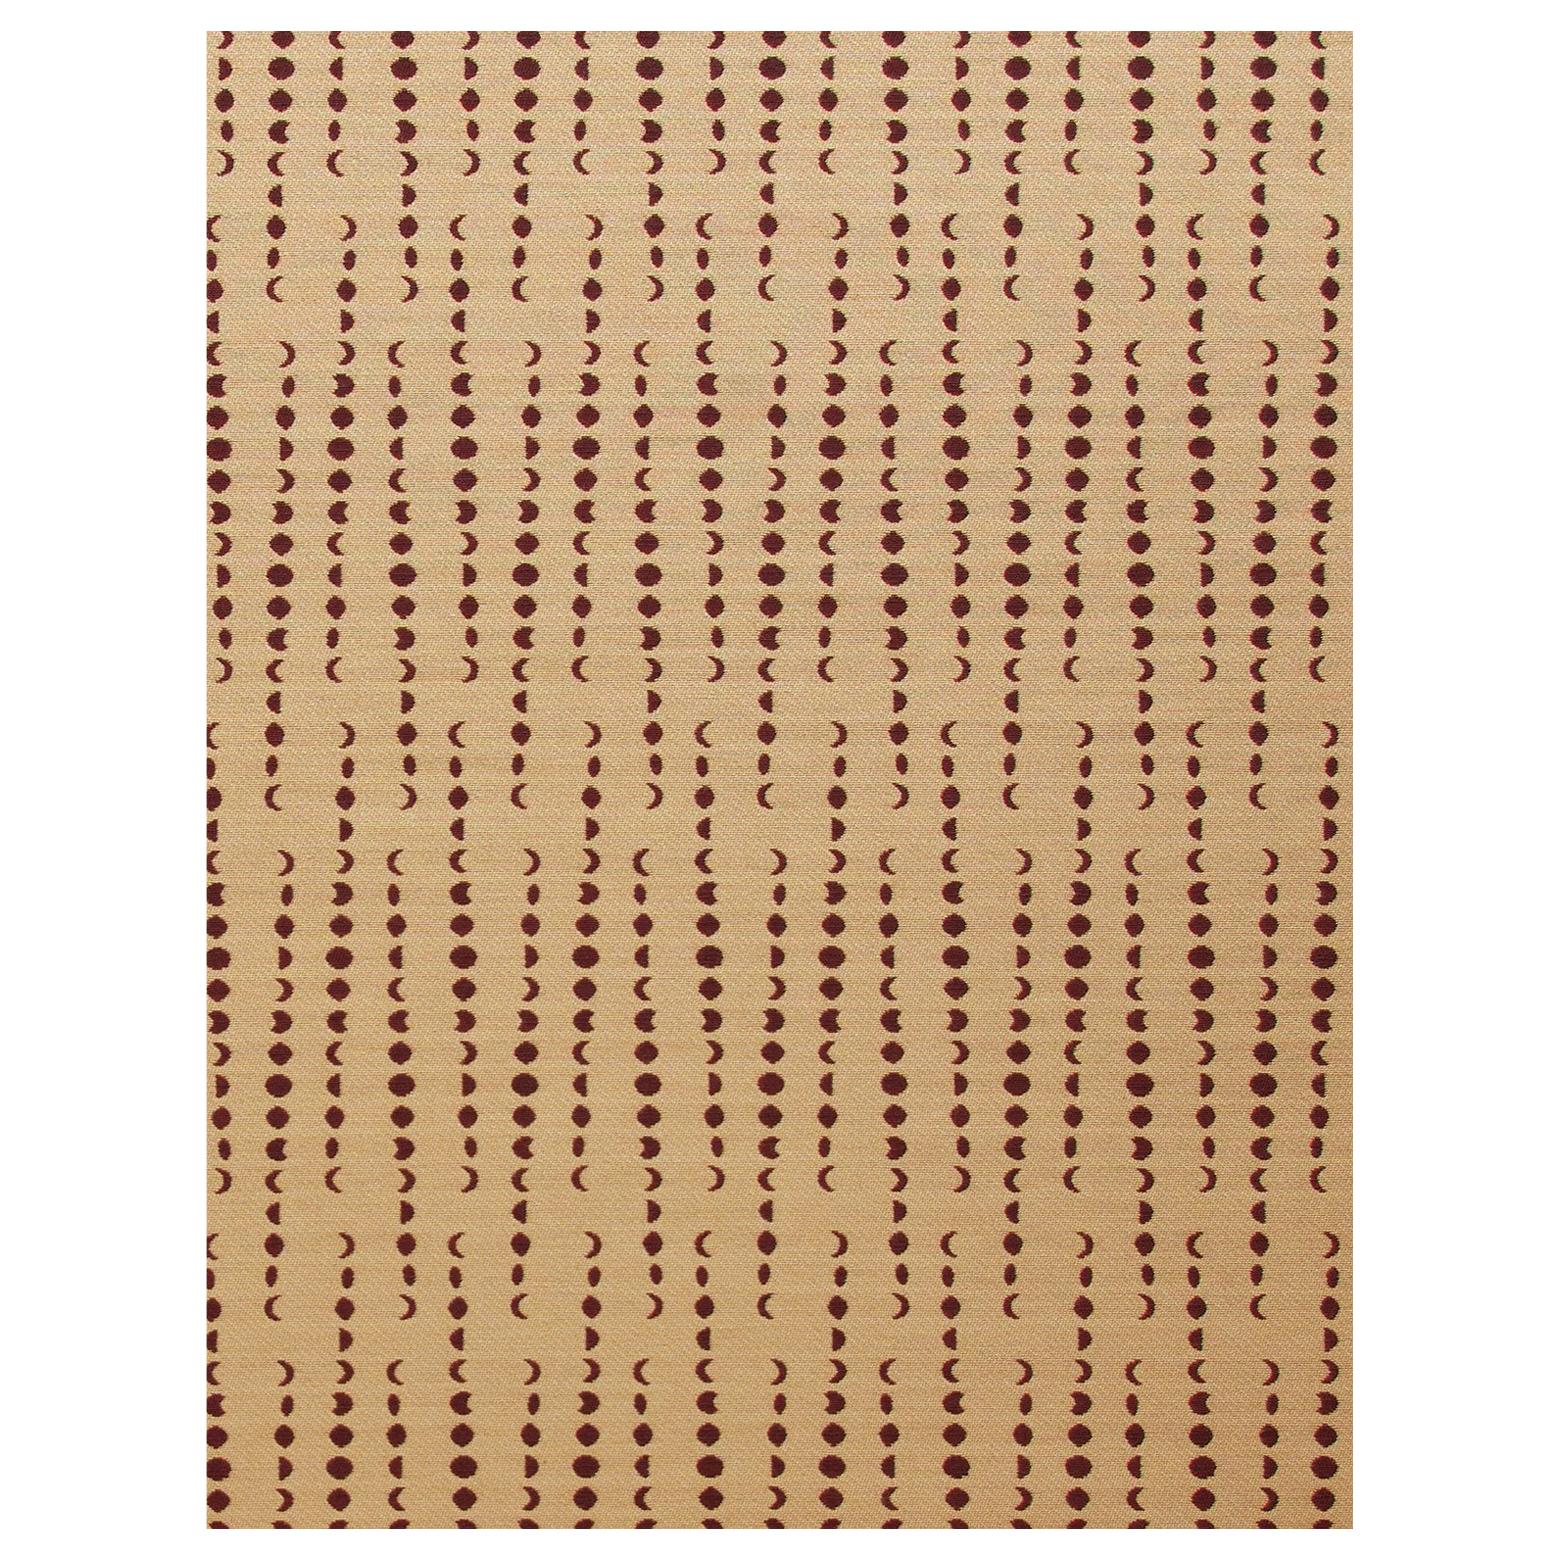 Earthlight Moon Woven Commercial Grade Fabric in Sol, Camel and Burgundy